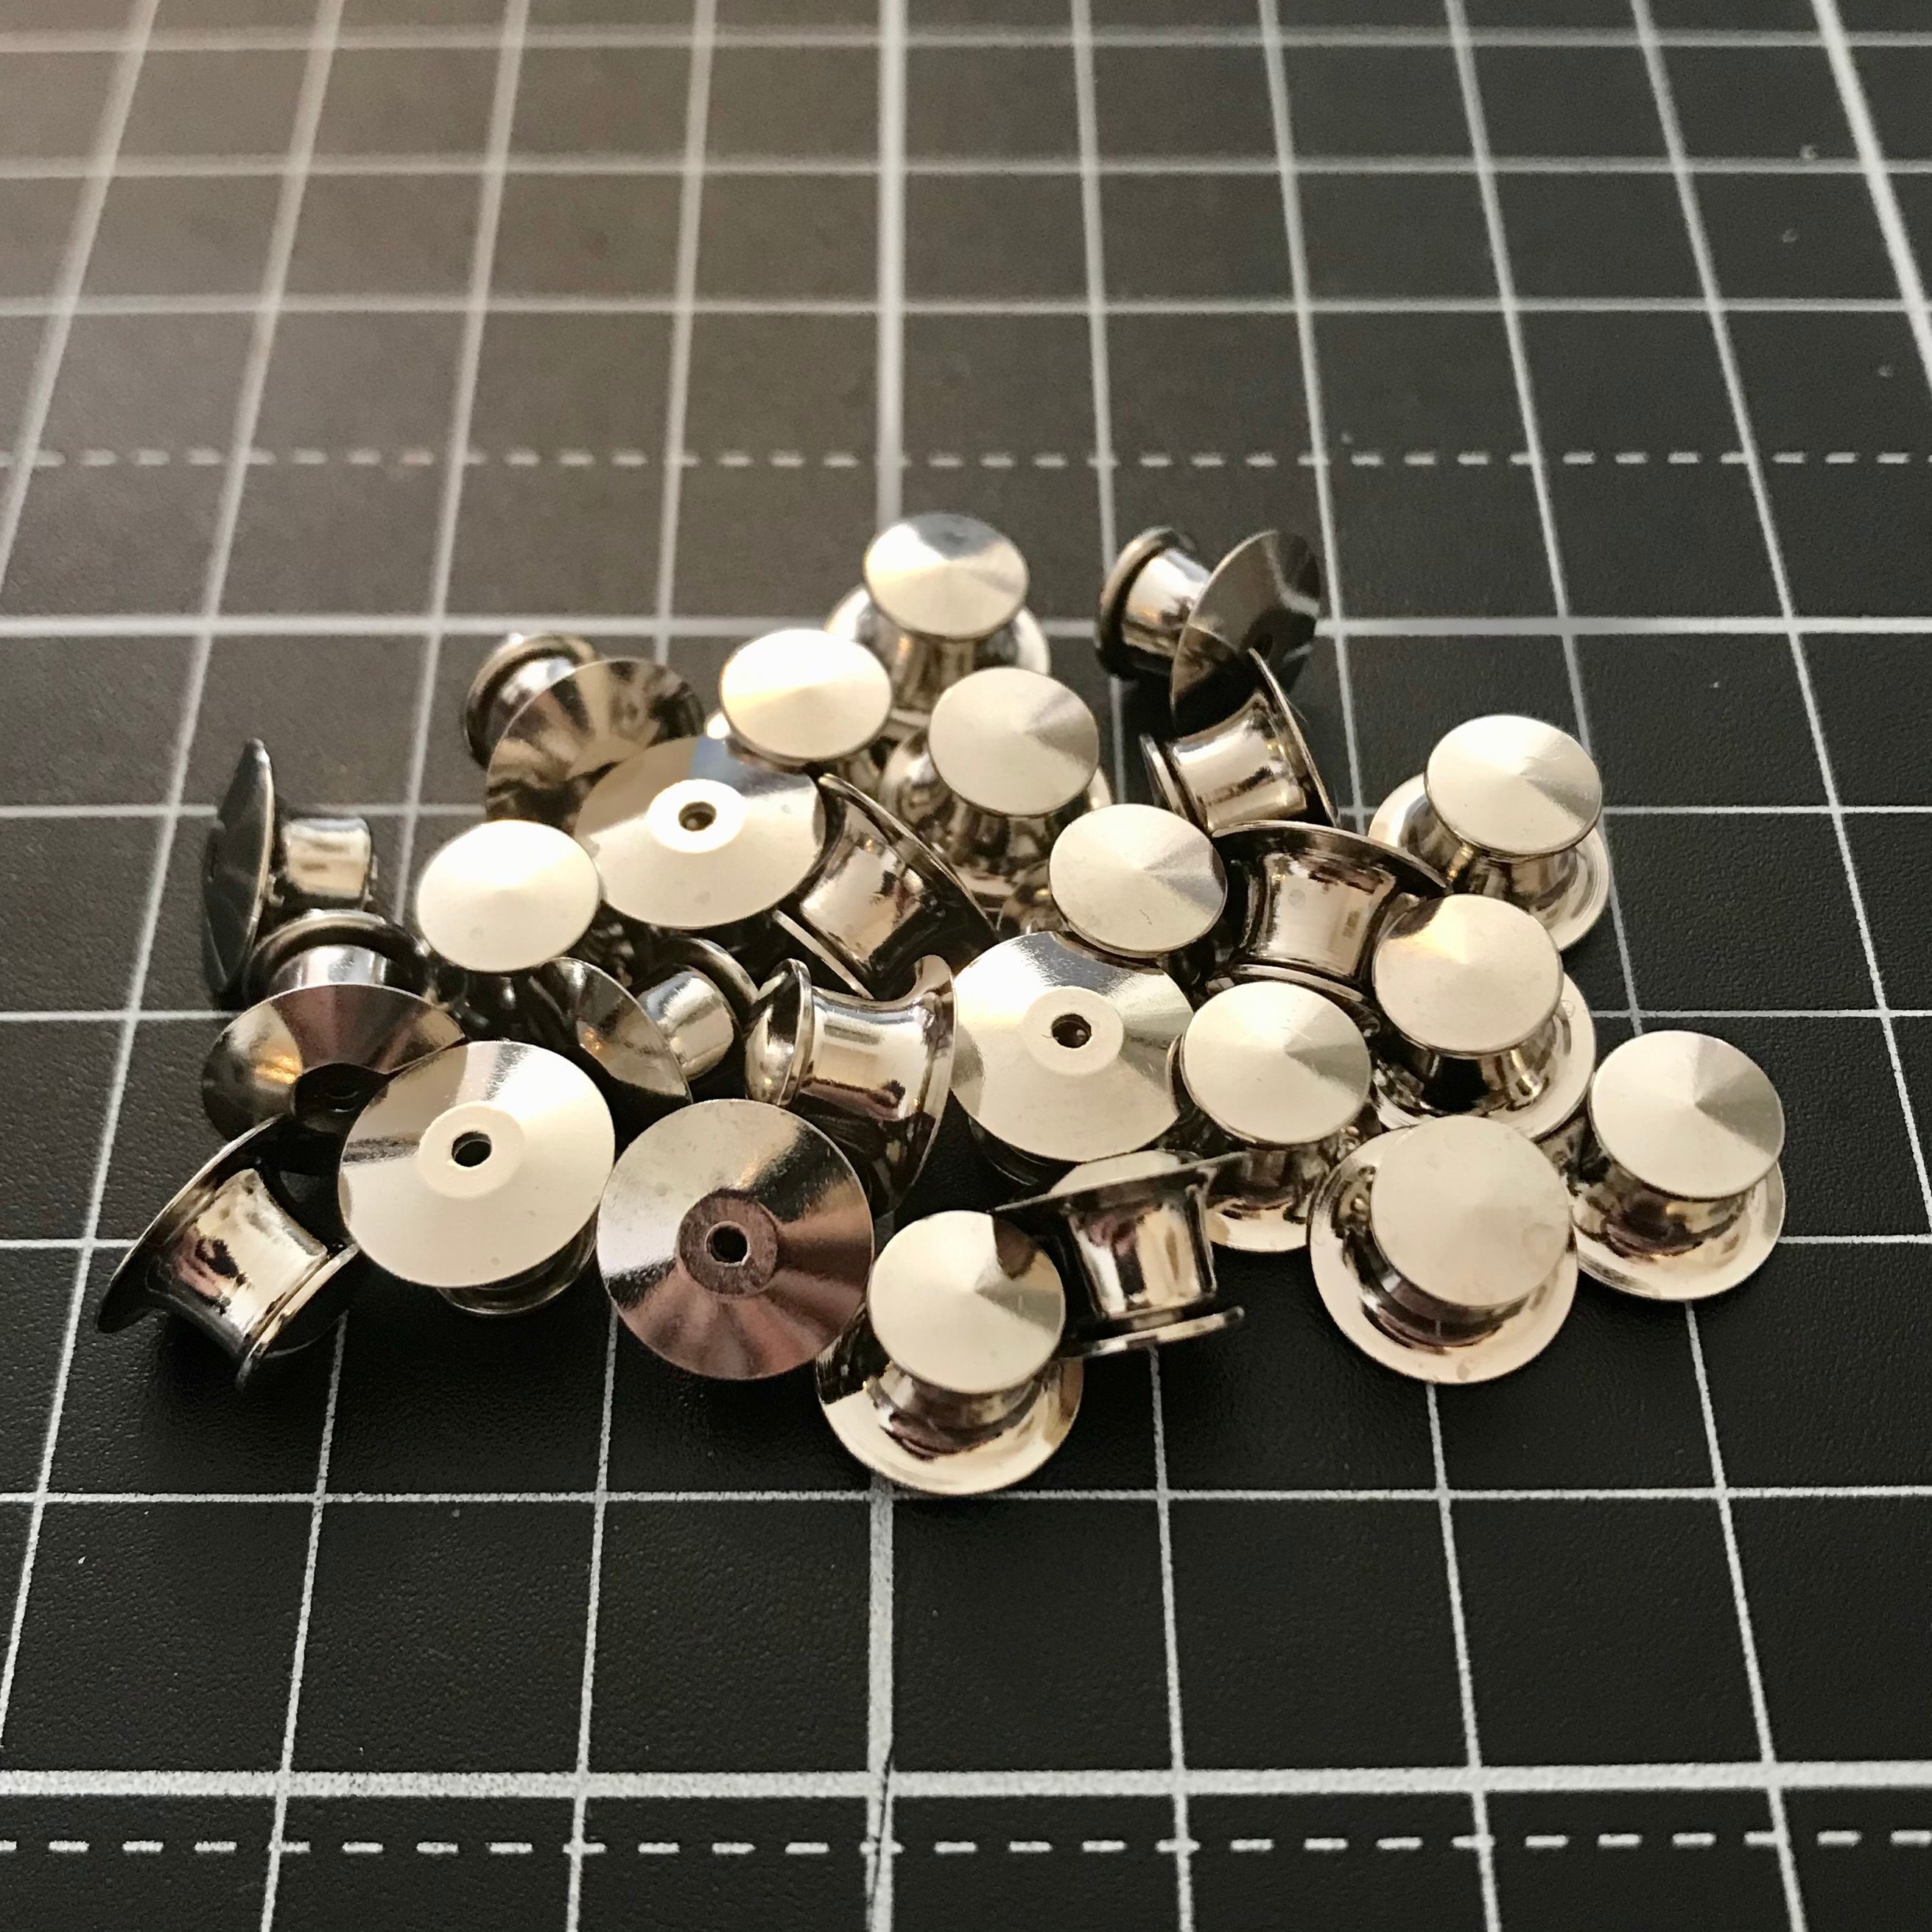 10mm X 7mm Locking Pin Backs Locking Clutch Secure Pin Back for Jewelry  Brooches Fastening Clasps, Name Badge Keepers Hooks Crafts, DIY 